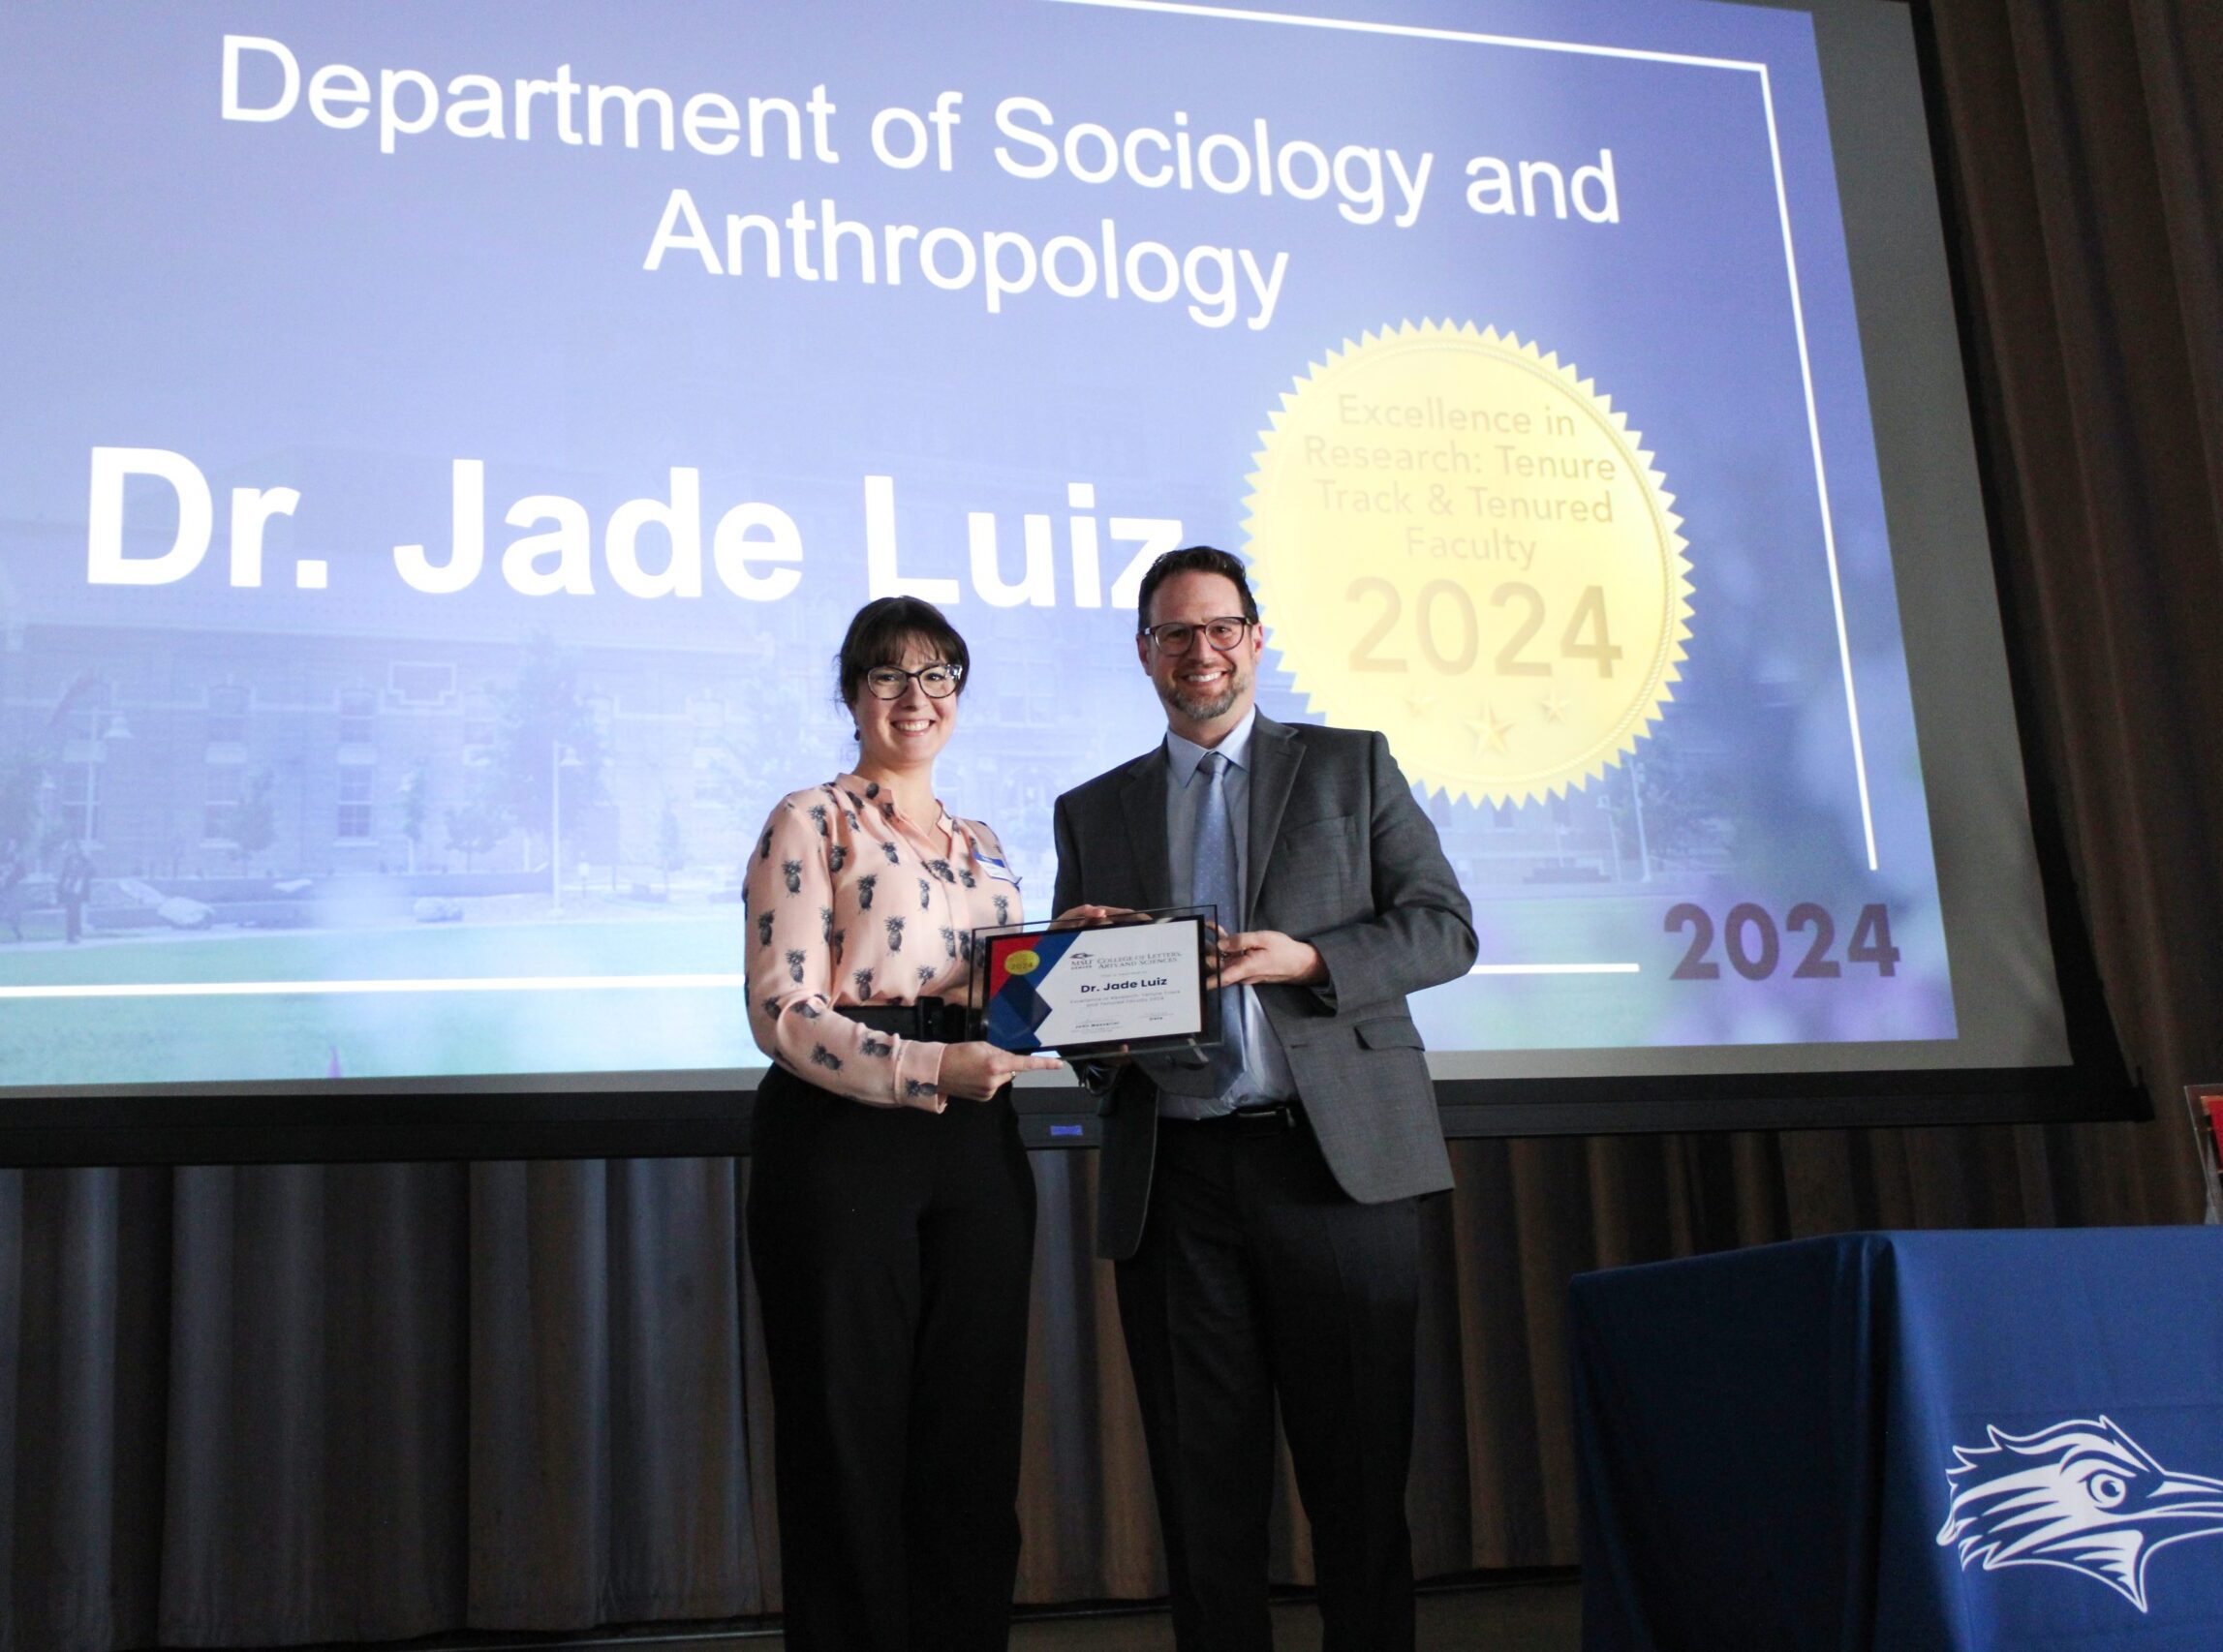 Dr. Jade Luiz receiving the 2024 CLAS Award for Excellence in Research